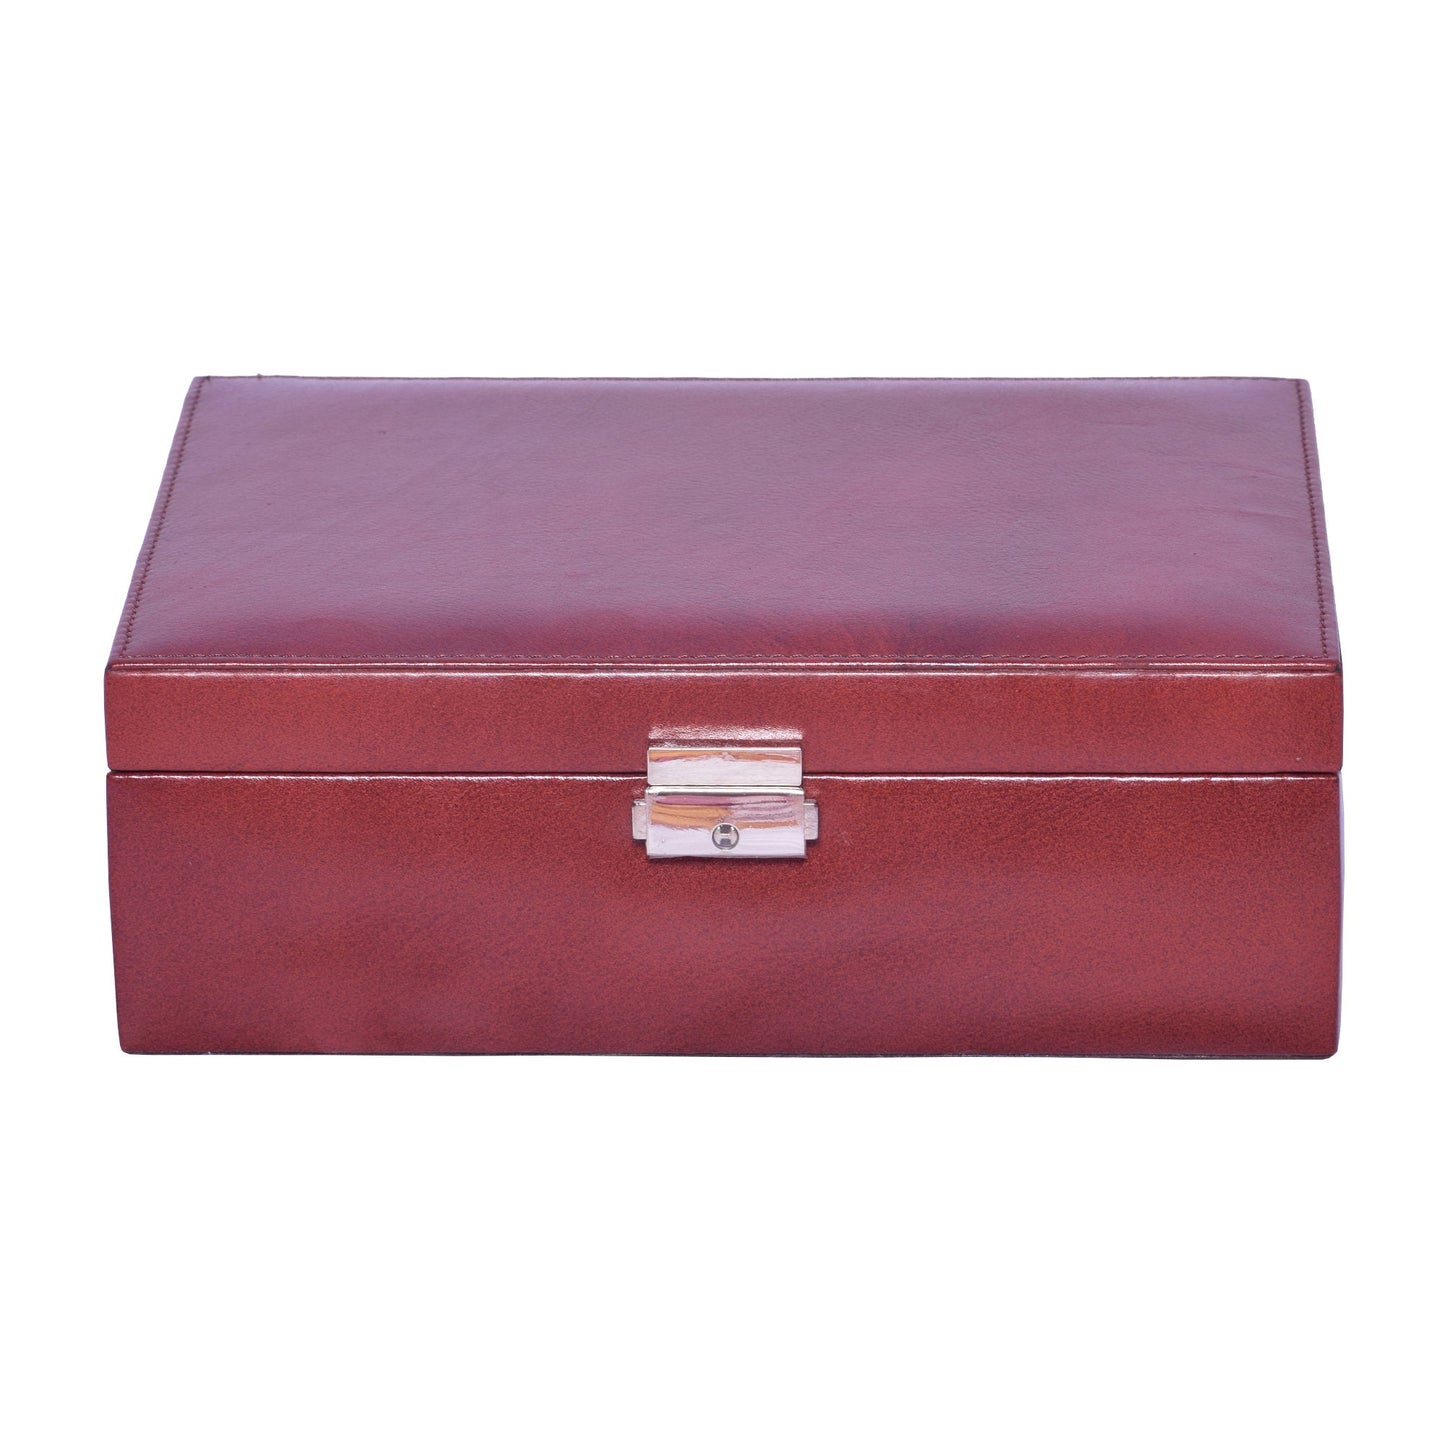 Women's Genuine Leather Jewelry Box Necklace Case Rings Pendants Organiser Gift Box